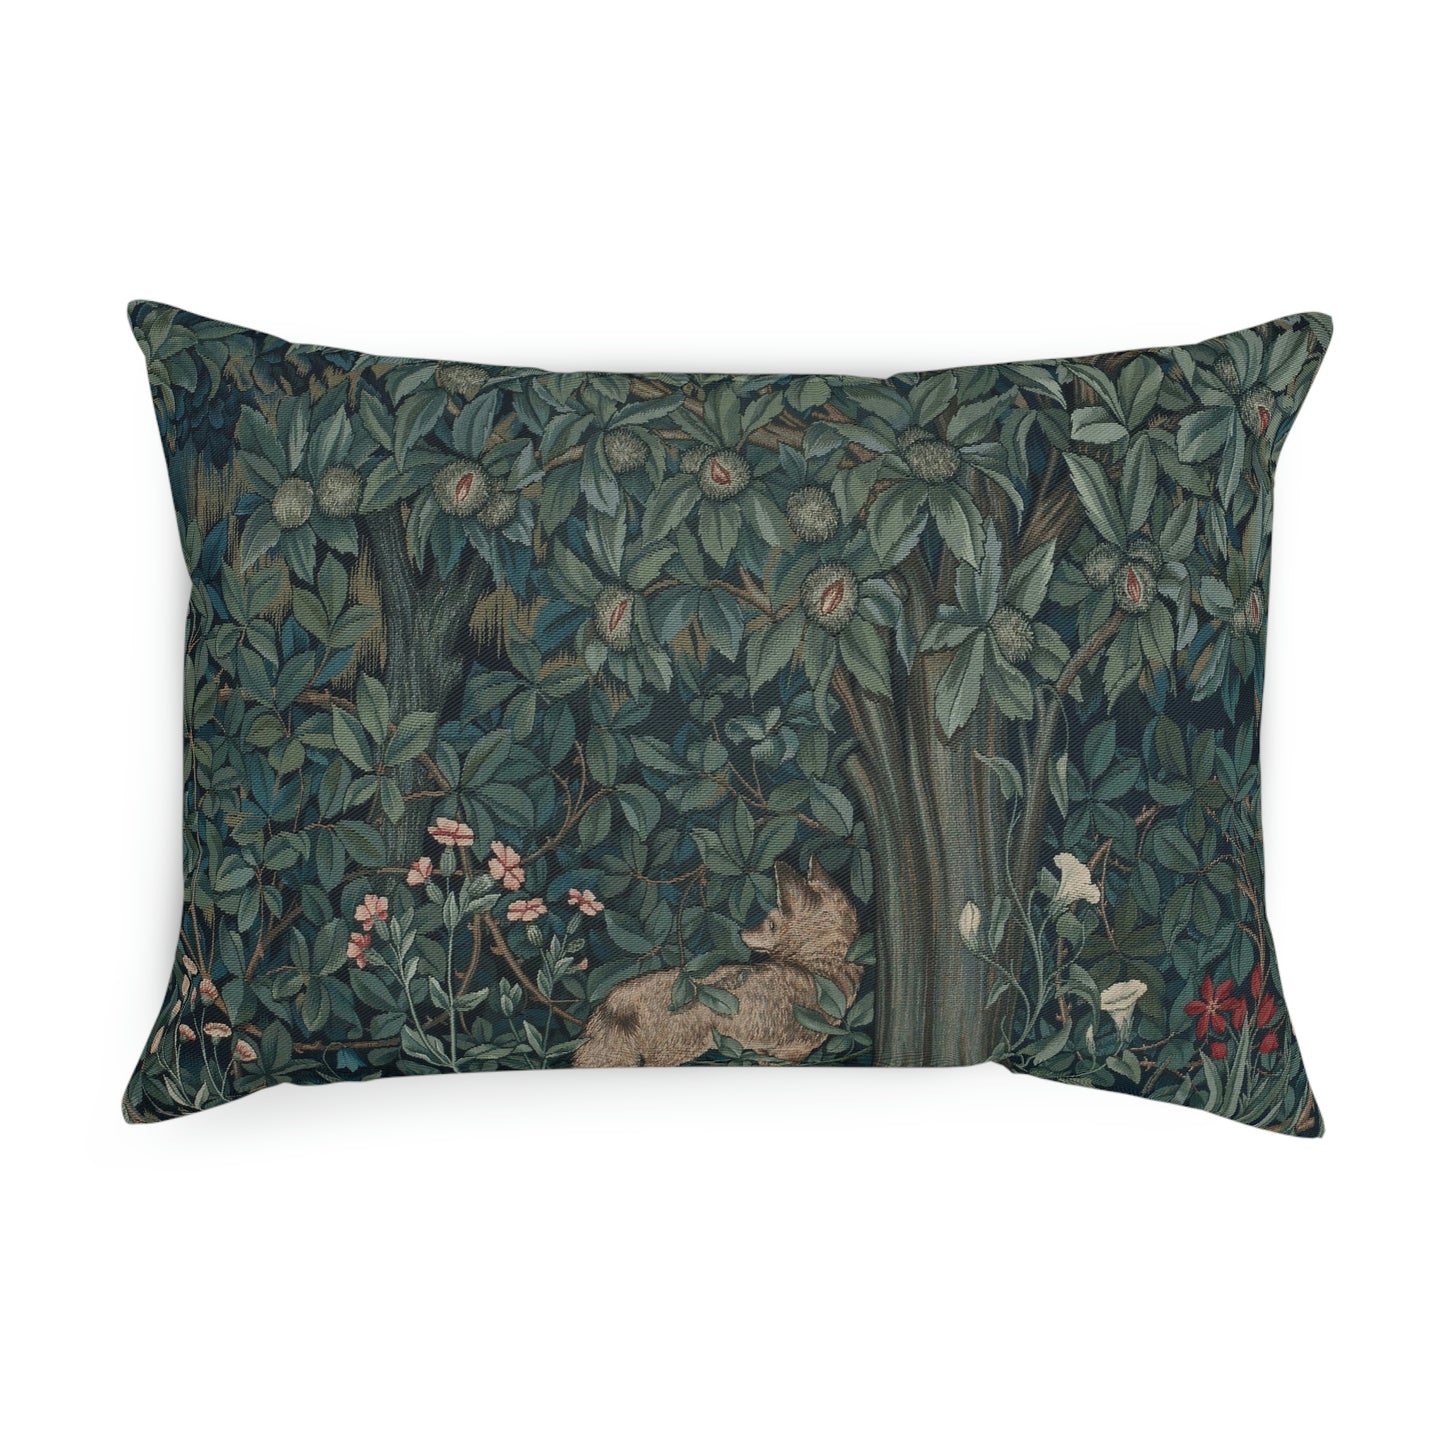 William-Morris-and-Co-Cushion-and-Cushion-Cover-Fox-by-John-Henry-Dearle-Green-Forest-Collection-12